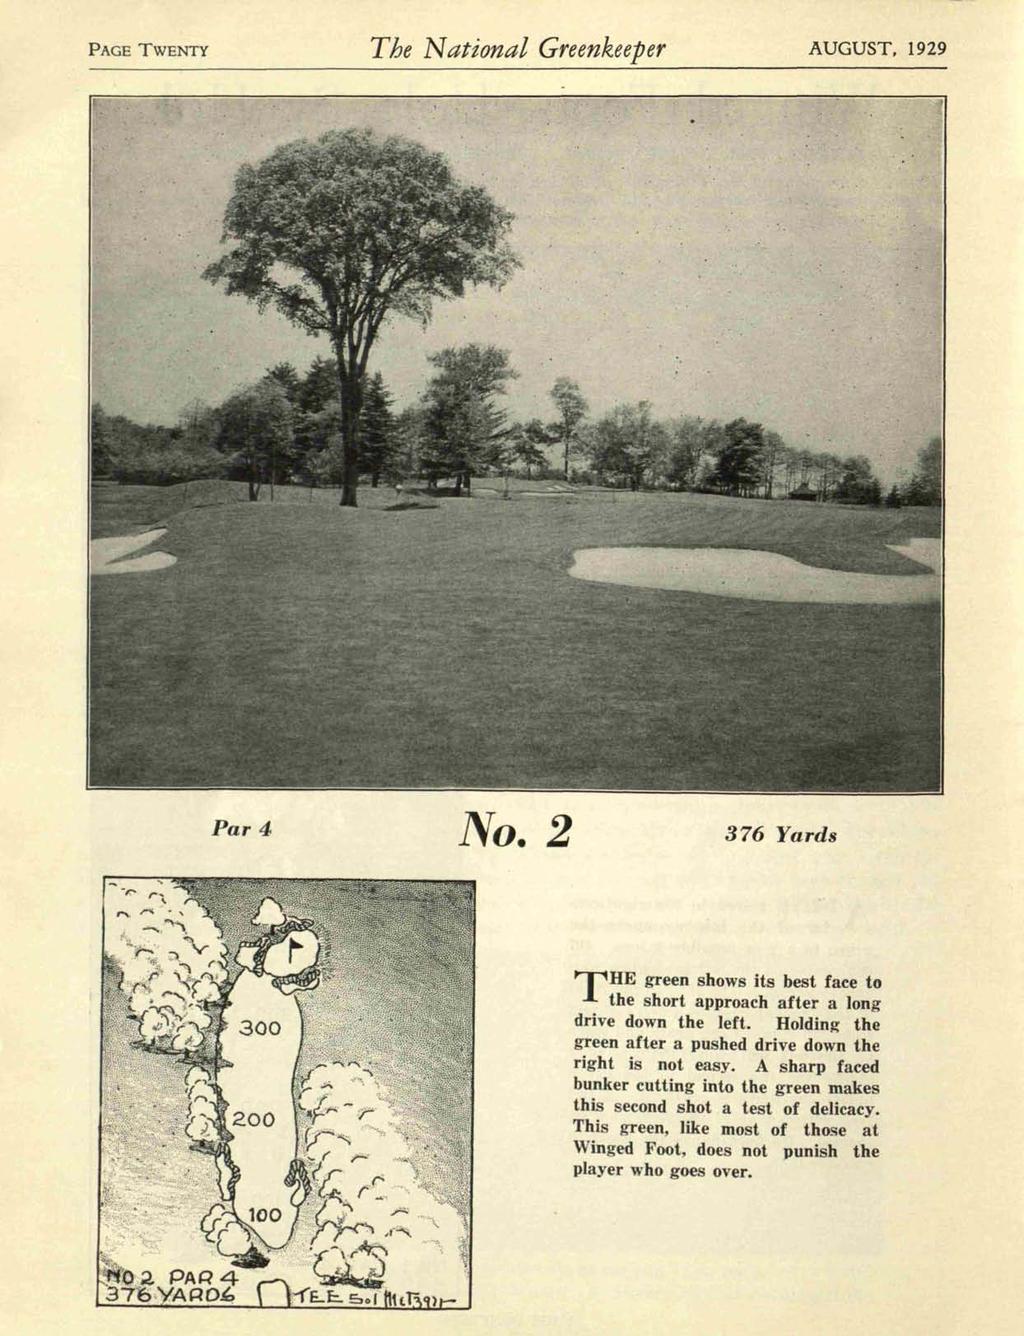 PAGE TWENTY r The National Greenkeeper AUGUST, 1929, Par 4 No.2 376 Yards THE green shows its best face to the short approach after a long drive down the left.